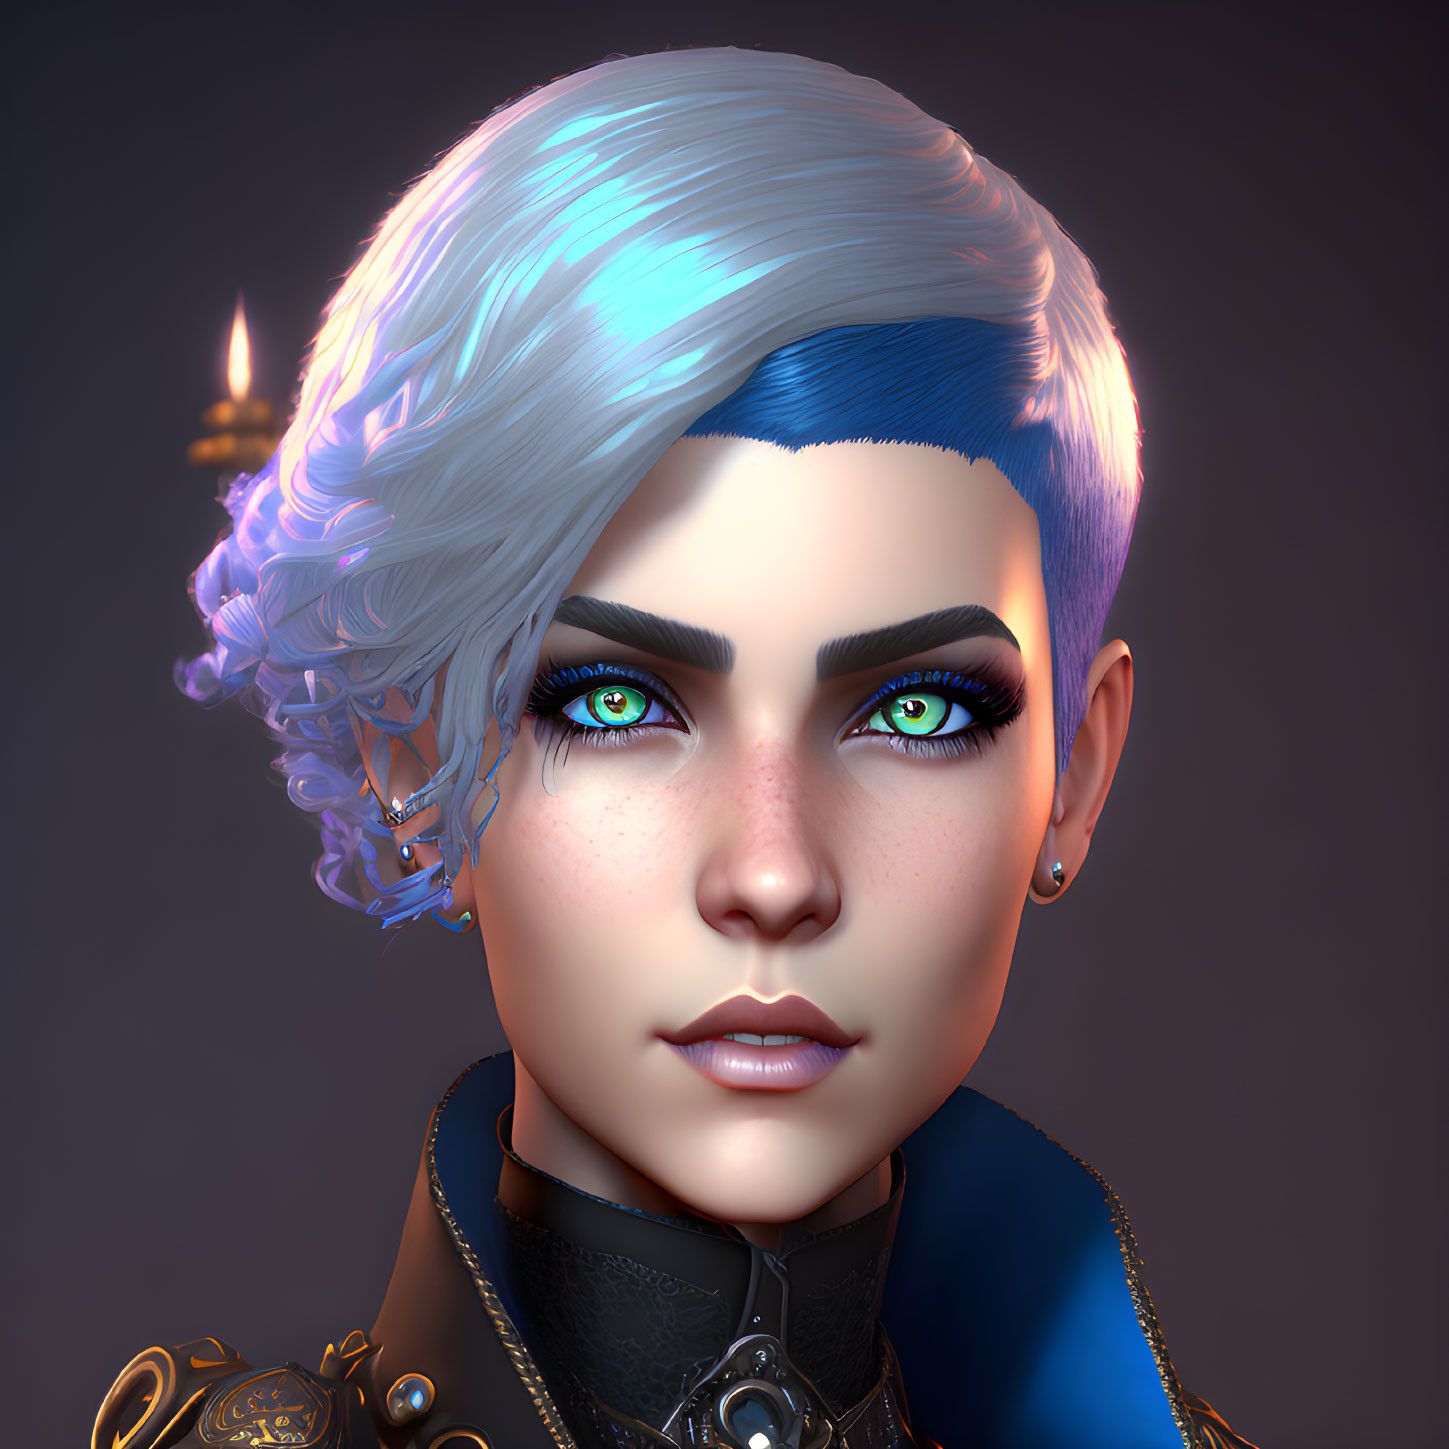 Person with Blue and White Hair in Medieval Outfit: 3D Illustration